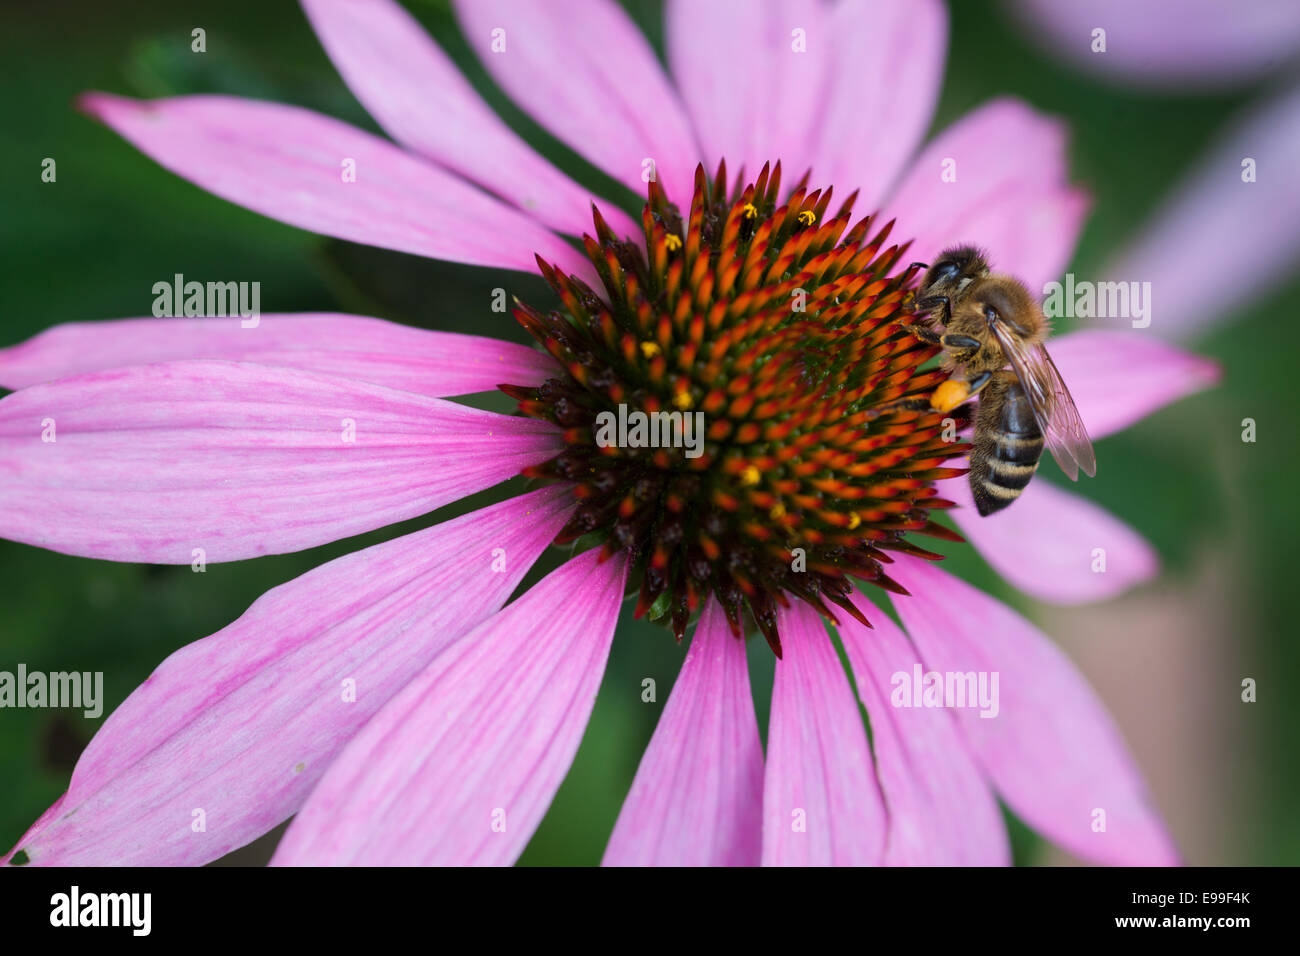 A close-up shot of a blooming coneflower with a bee gathering pollen Stock Photo